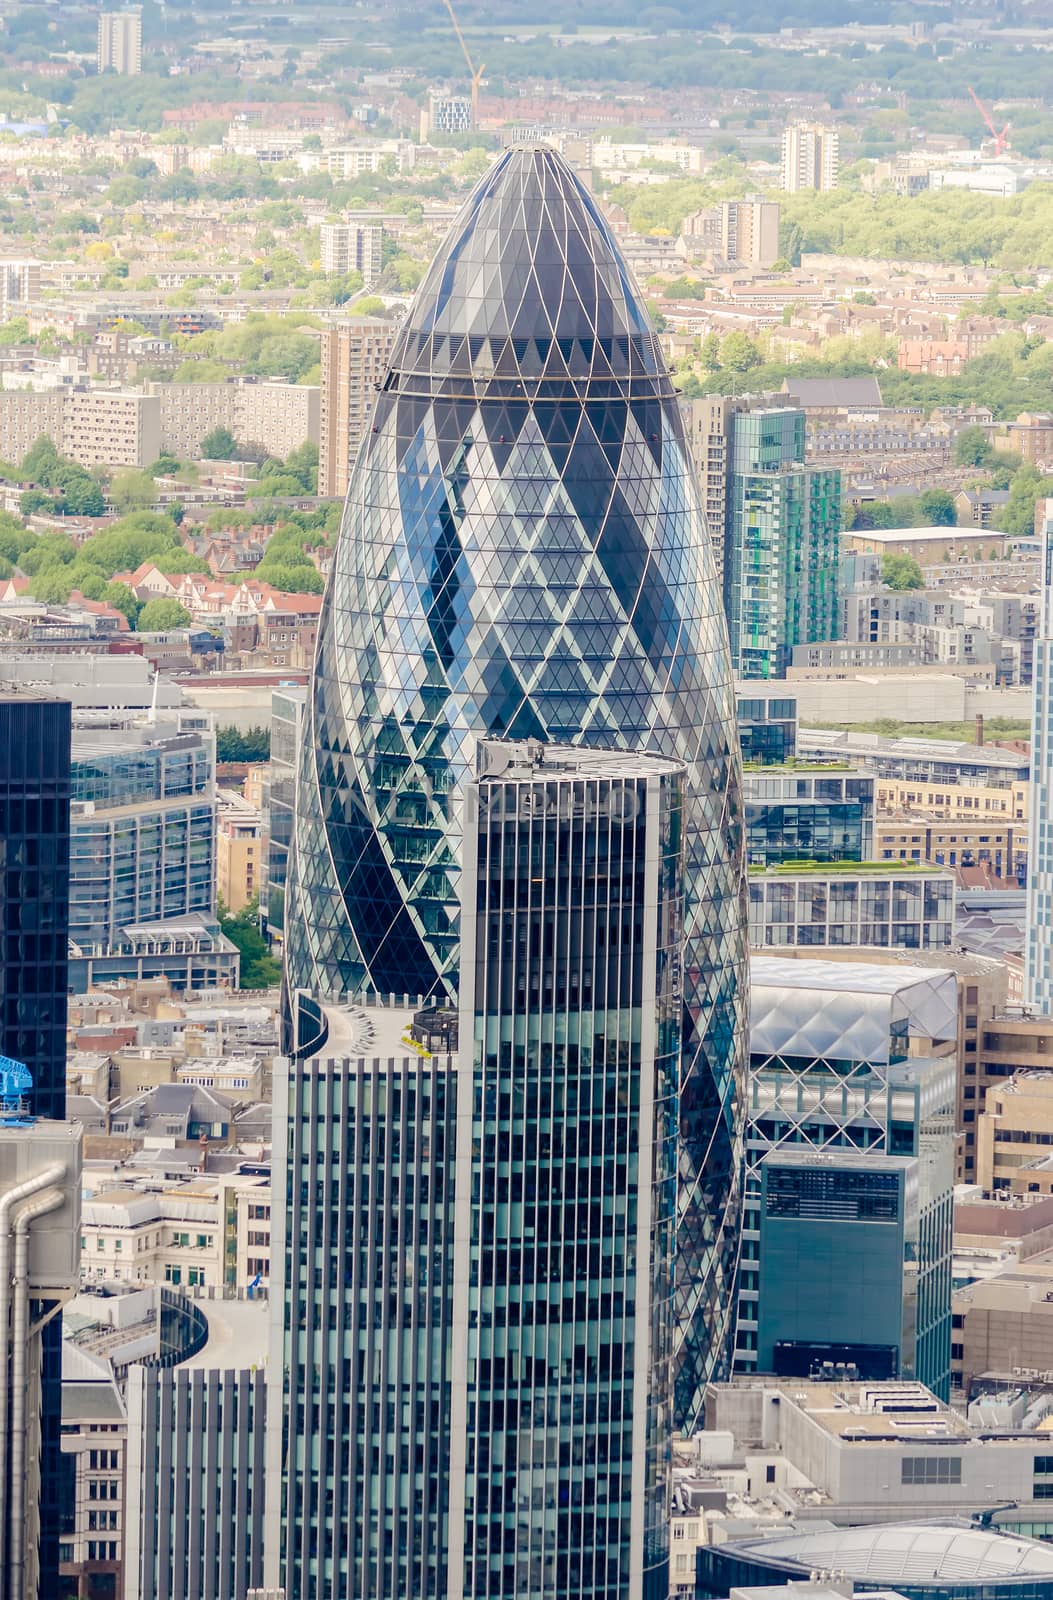 LONDON - MAY 29: The Gherkin building (30 St Mary Axe) in London on May 29, 2015. Iconic landmark of London, this is one of the city's most widely recognized examples of modern architecture.